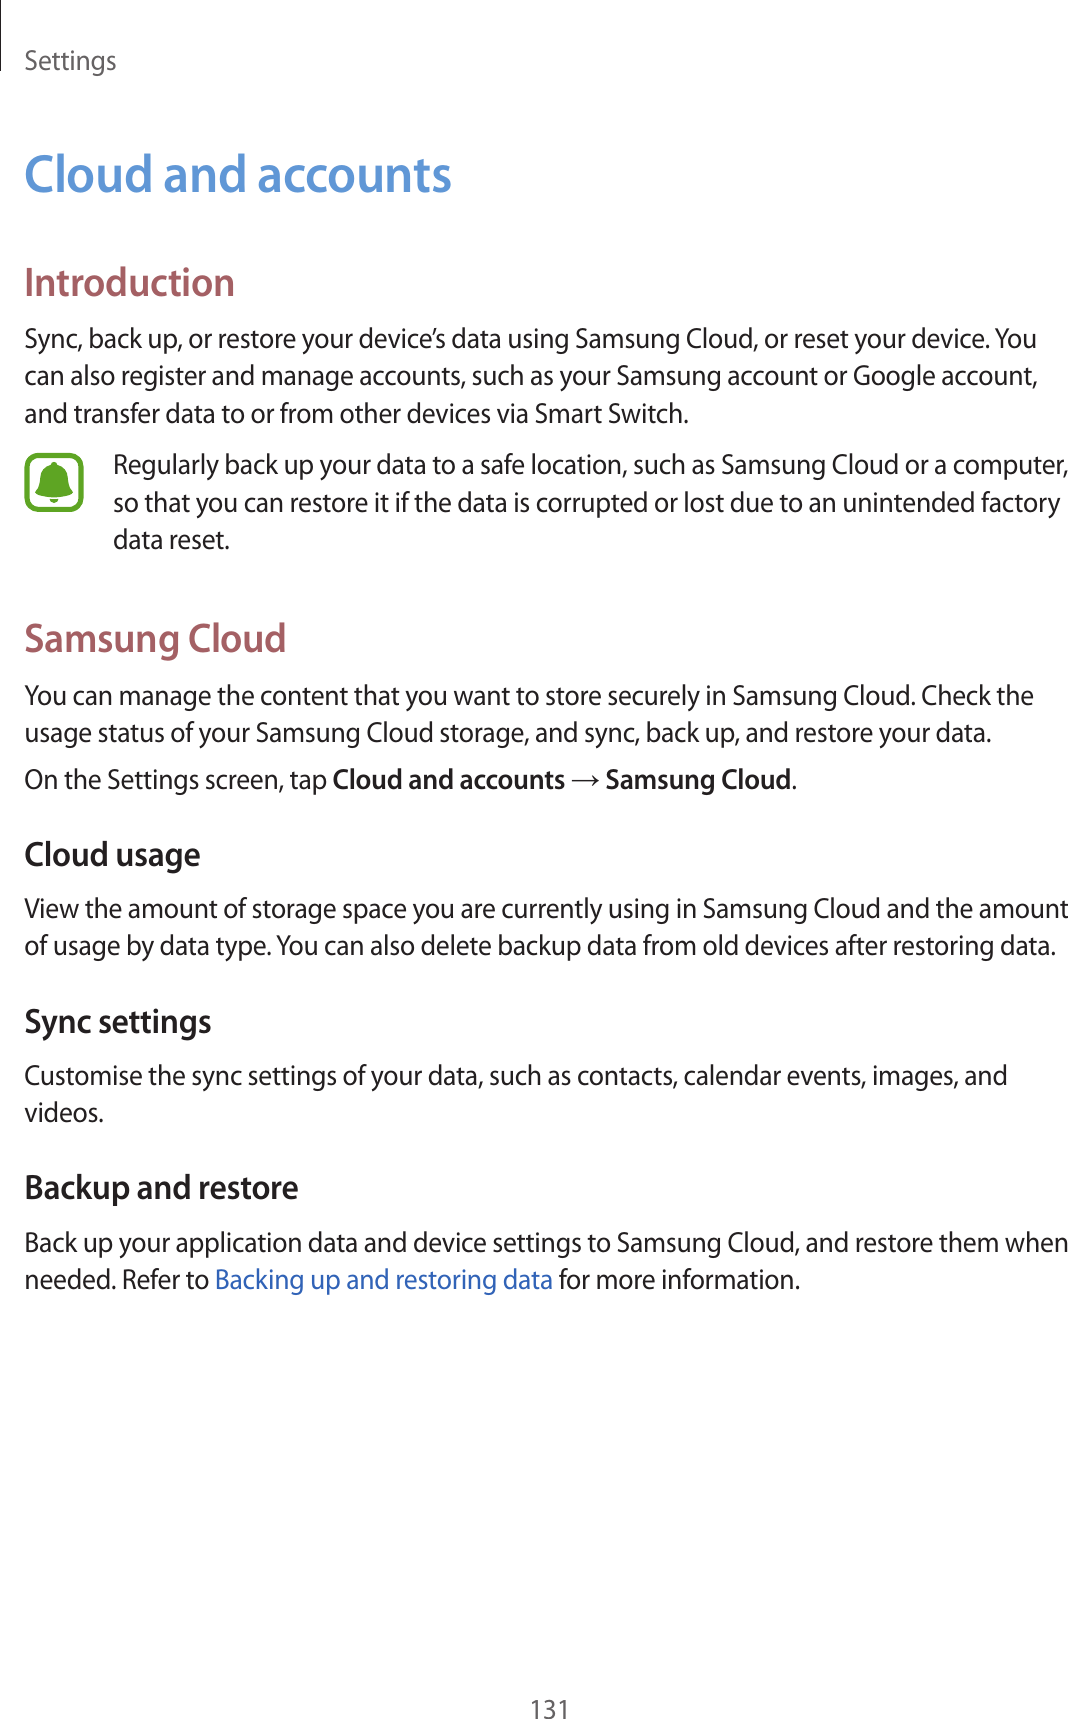 Settings131Cloud and accountsIntroductionSync, back up, or restore your device’s data using Samsung Cloud, or reset your device. You can also register and manage accounts, such as your Samsung account or Google account, and transfer data to or from other devices via Smart Switch.Regularly back up your data to a safe location, such as Samsung Cloud or a computer, so that you can restore it if the data is corrupted or lost due to an unintended factory data reset.Samsung CloudYou can manage the content that you want to store securely in Samsung Cloud. Check the usage status of your Samsung Cloud storage, and sync, back up, and restore your data.On the Settings screen, tap Cloud and accounts → Samsung Cloud.Cloud usageView the amount of storage space you are currently using in Samsung Cloud and the amount of usage by data type. You can also delete backup data from old devices after restoring data.Sync settingsCustomise the sync settings of your data, such as contacts, calendar events, images, and videos.Backup and restoreBack up your application data and device settings to Samsung Cloud, and restore them when needed. Refer to Backing up and restoring data for more information.